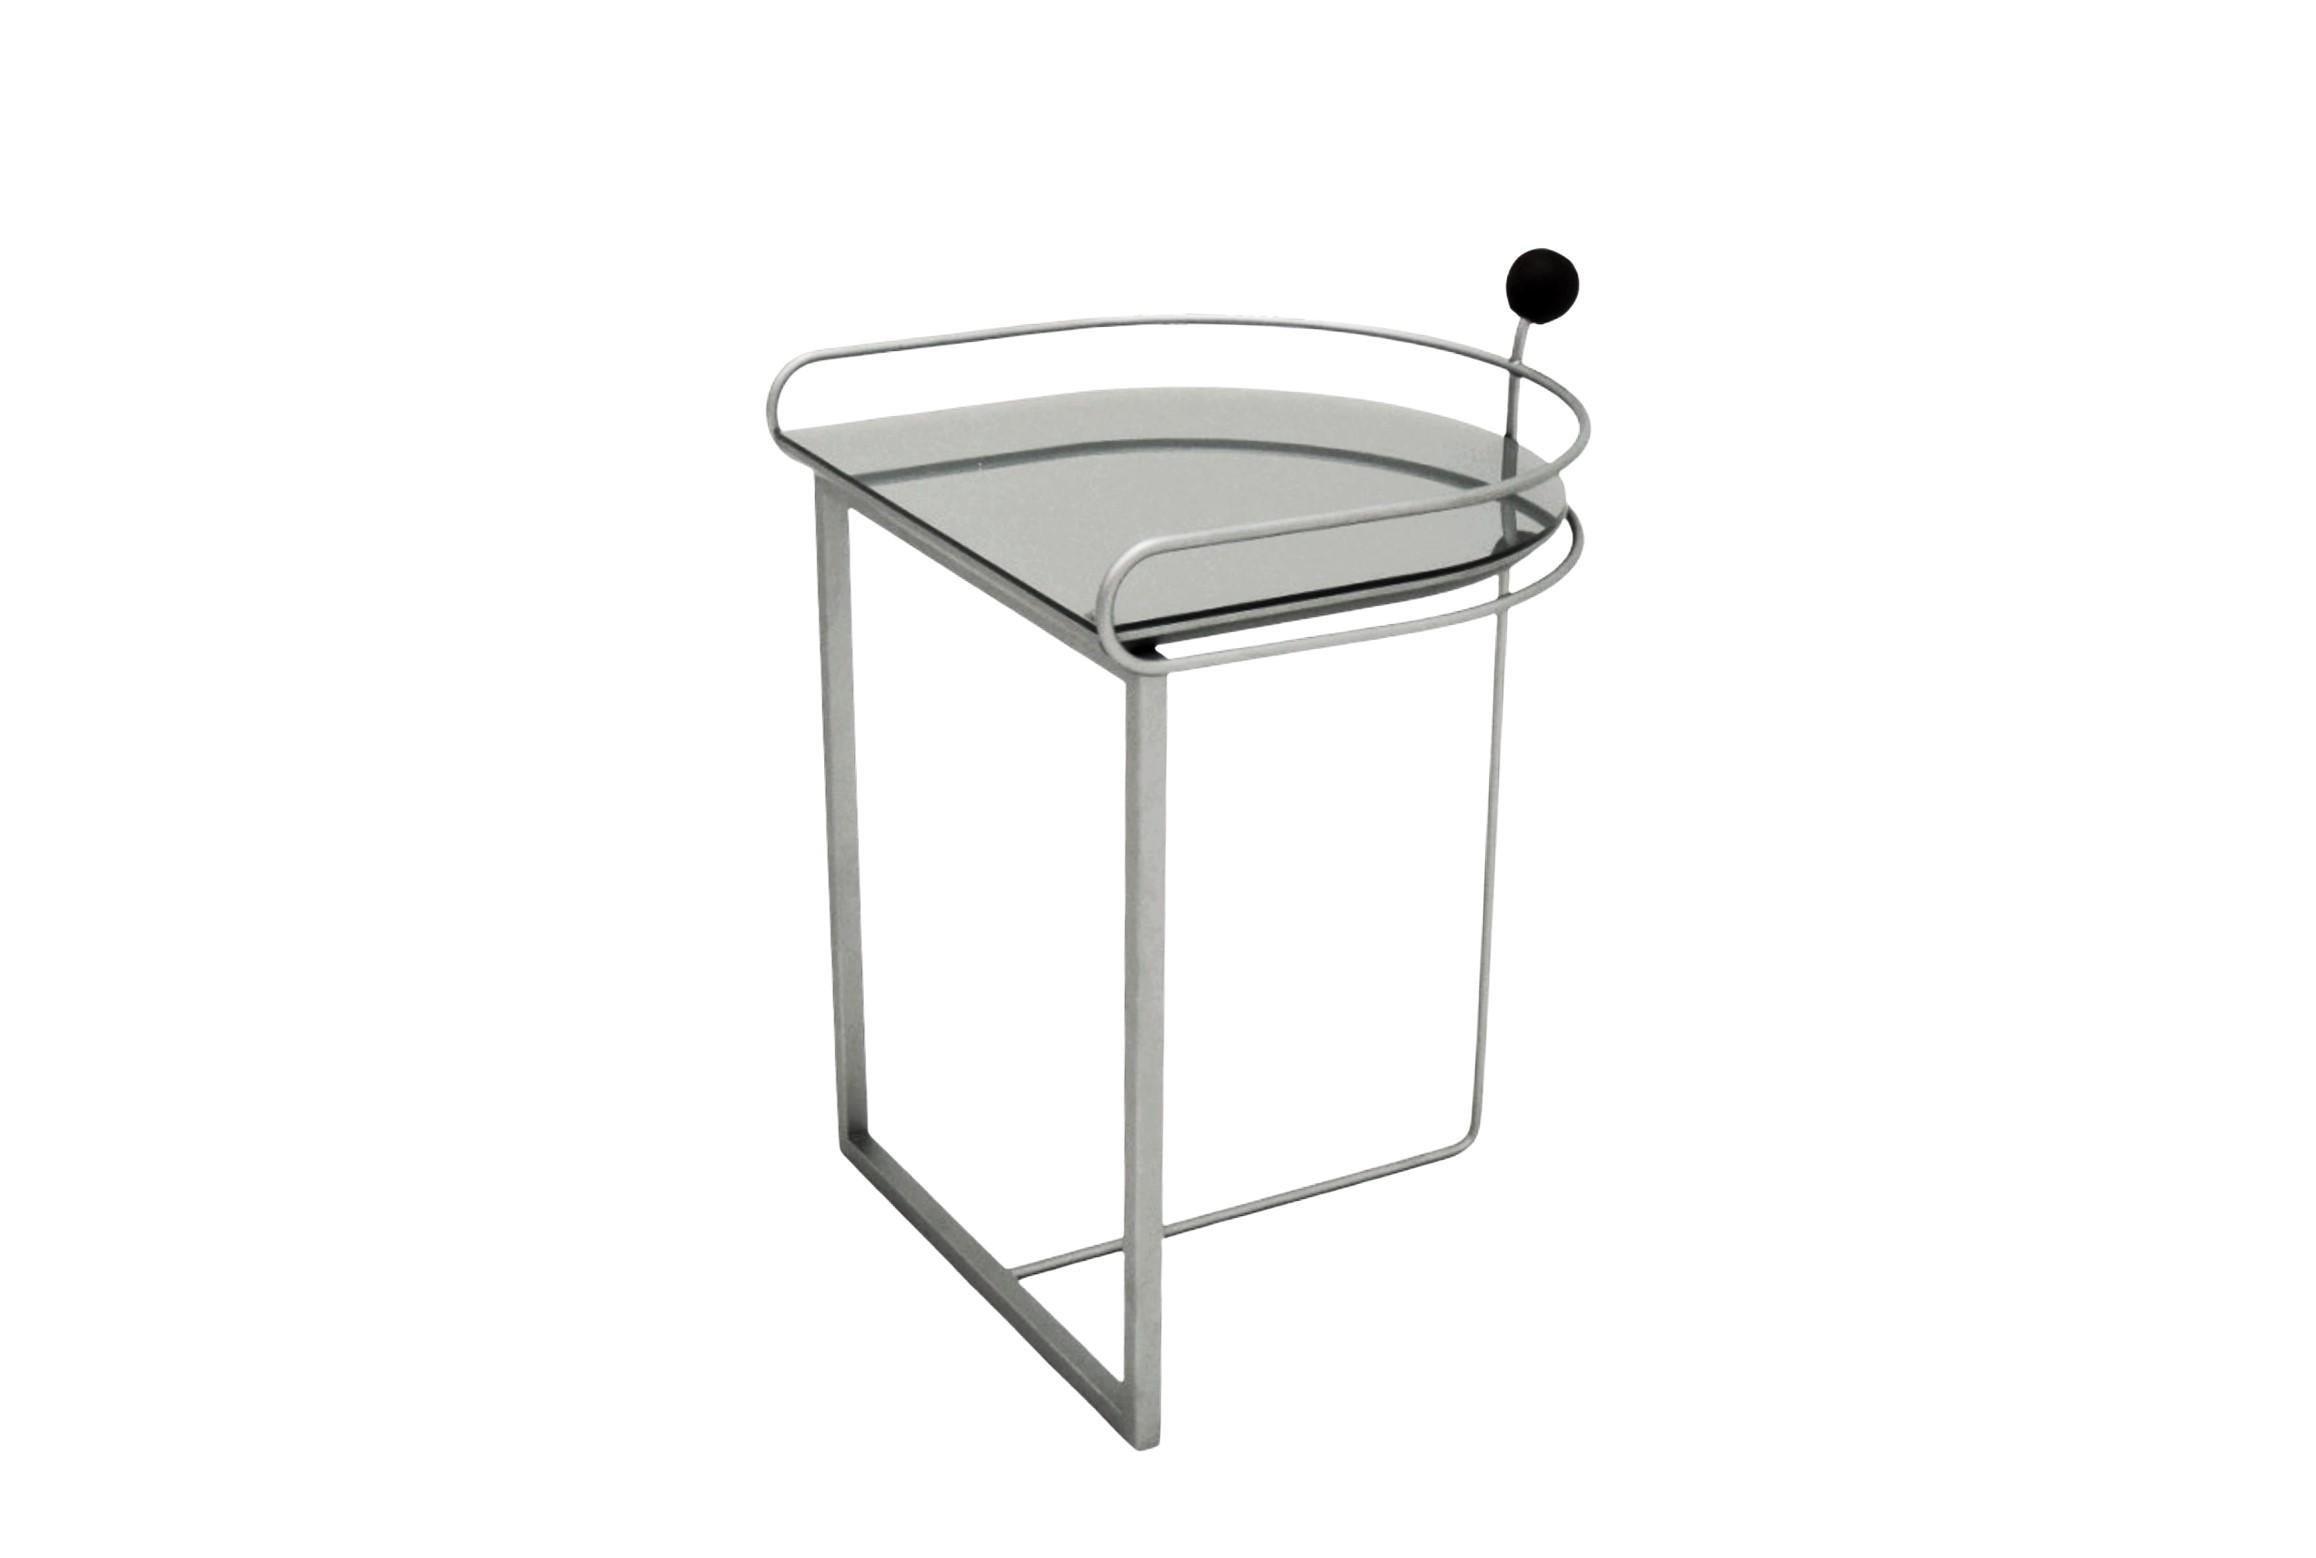 Alba Side Table is produced with a carbon steel structure with automotive painting (the finish can be customized). The top is in MDF coated with glass, and they are also available with a variety of color options. It has a decorative handle with a